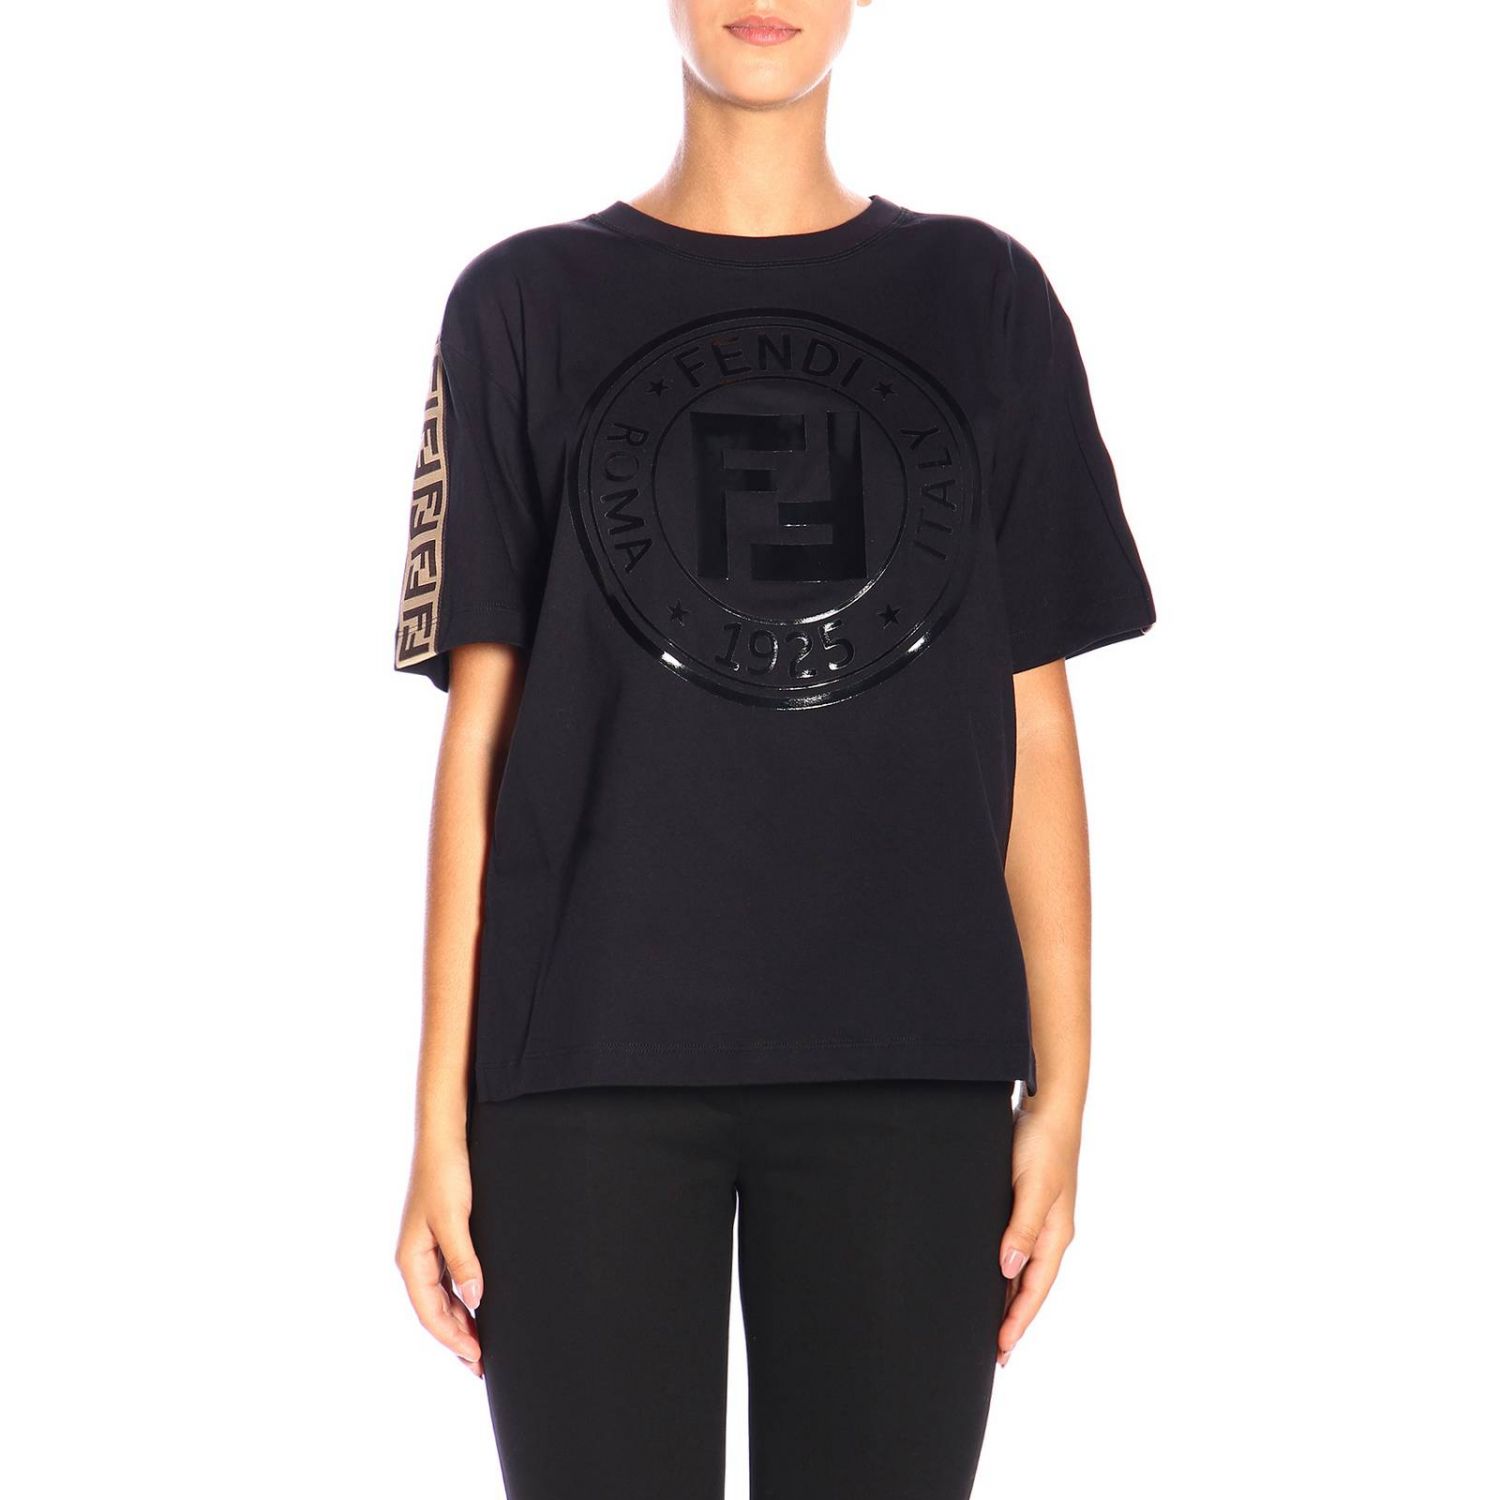 FENDI: Short-sleeved T-shirt by with FF symbol and bands | T-Shirt ...